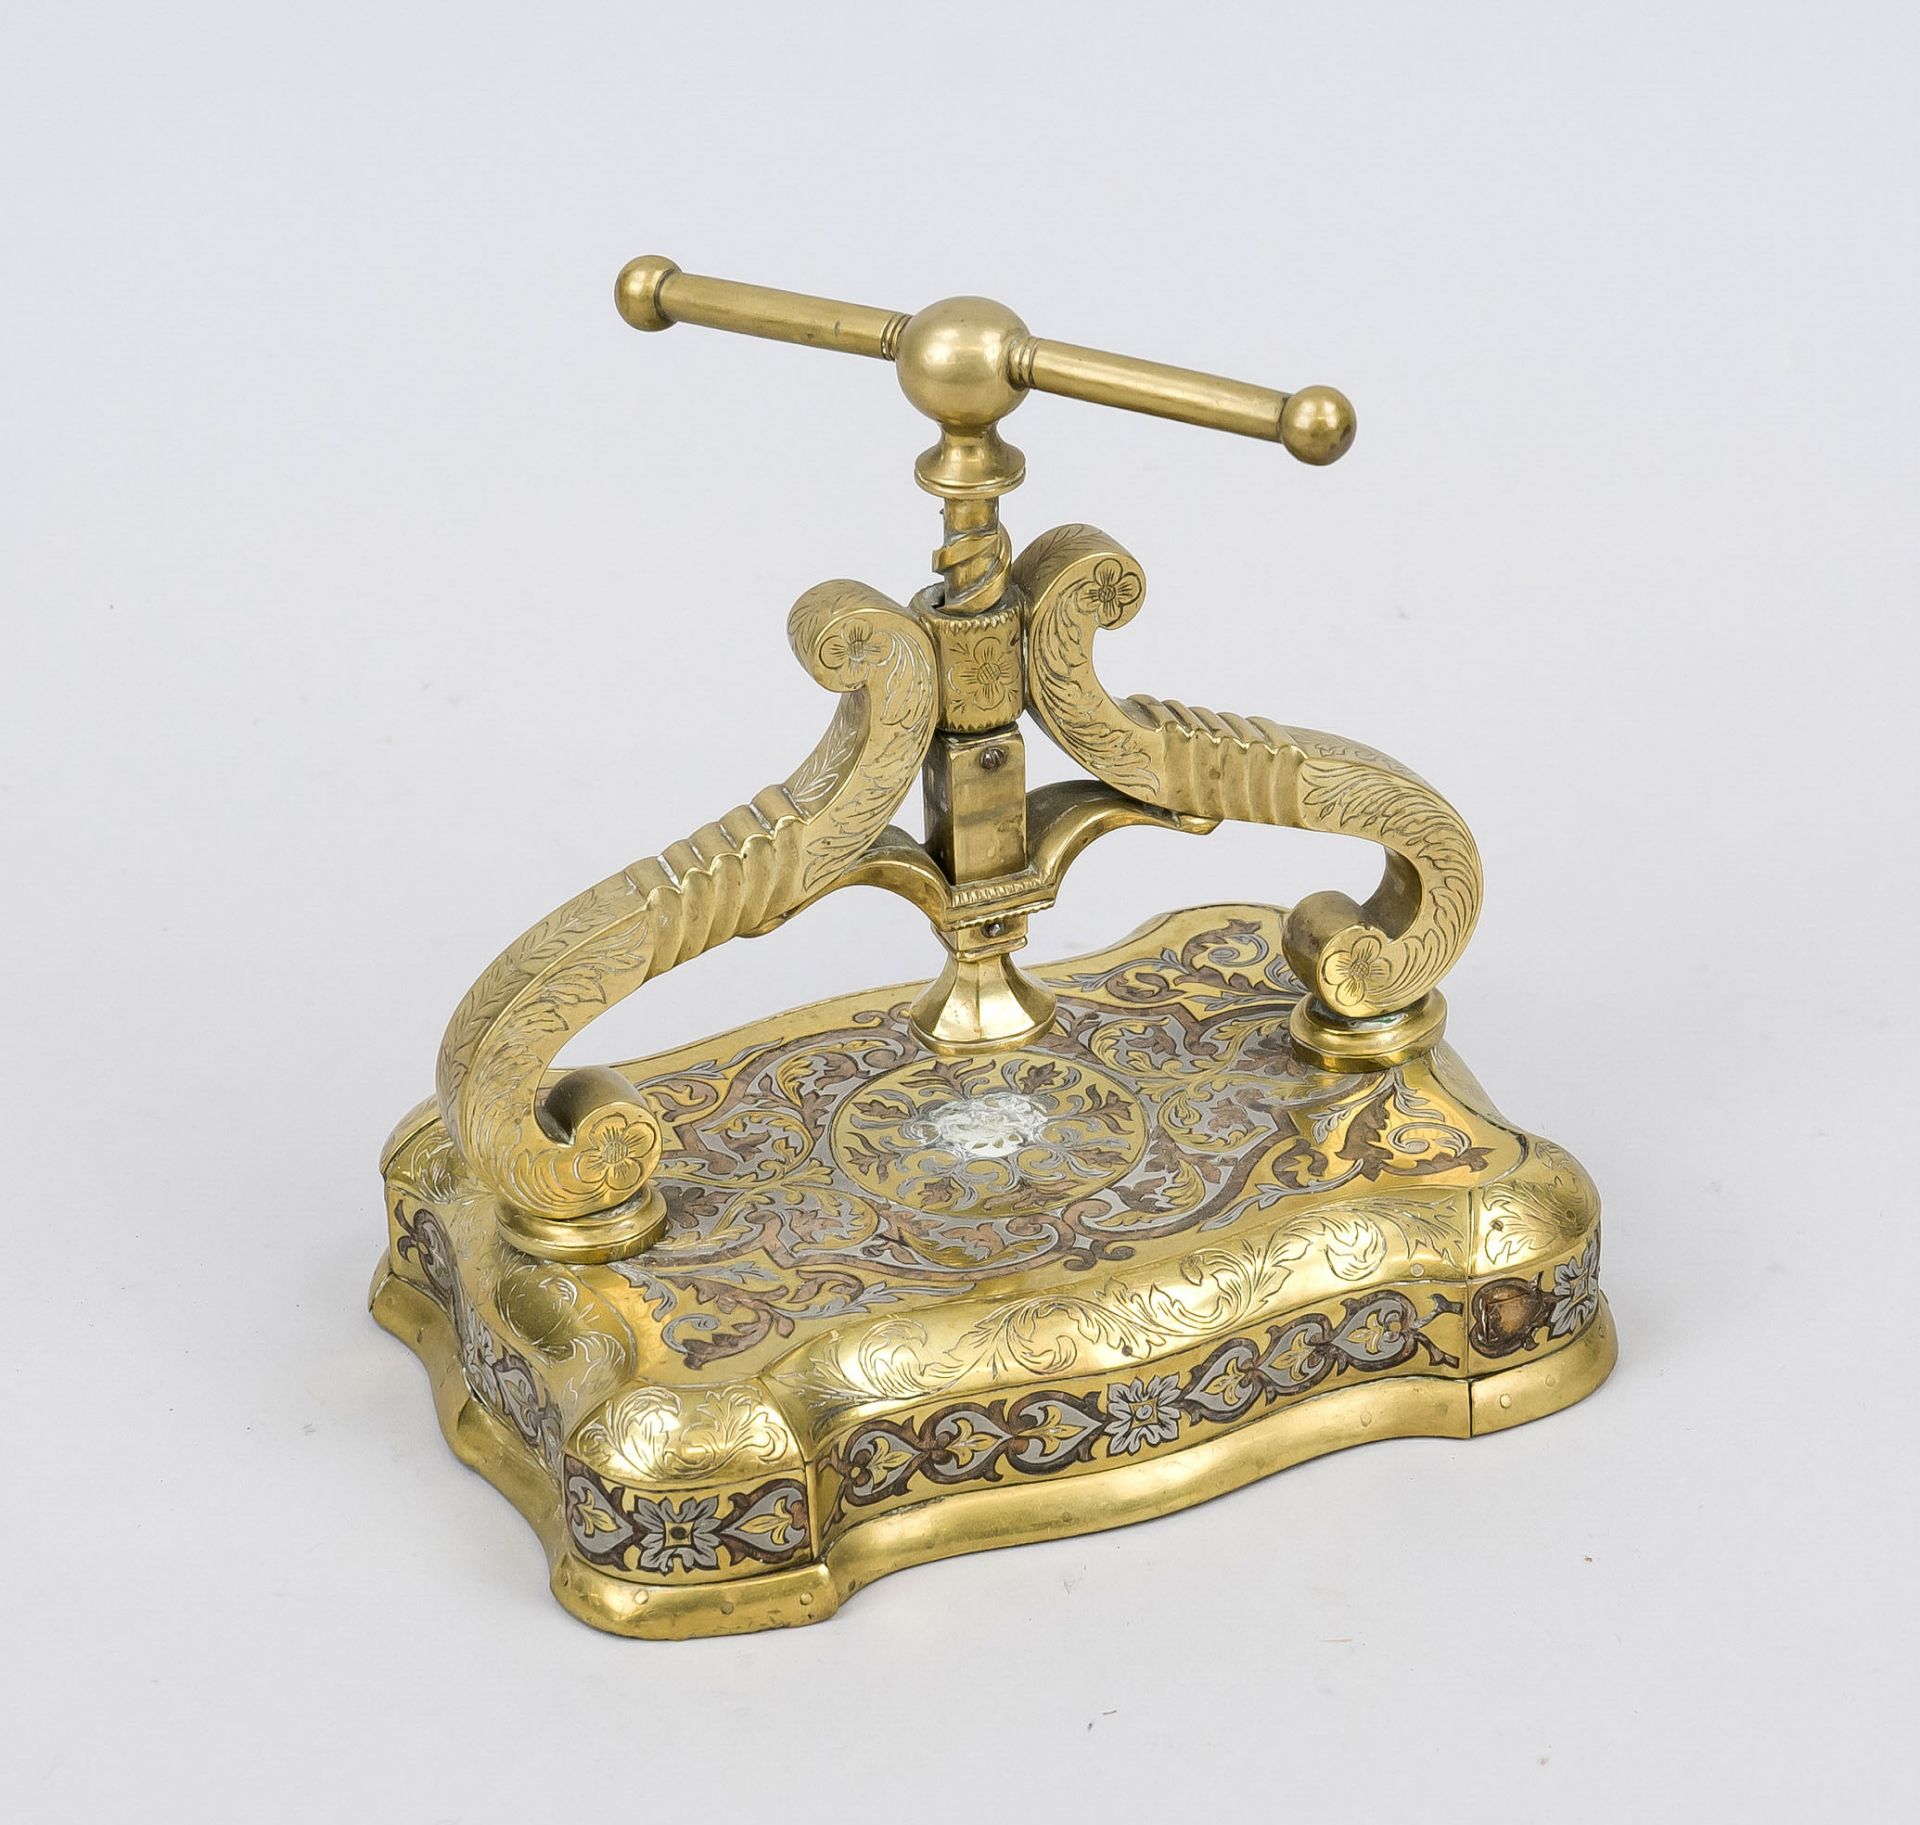 Decorative card press, 19th century, brass partly engraved, sheet brass partly pierced and metal (